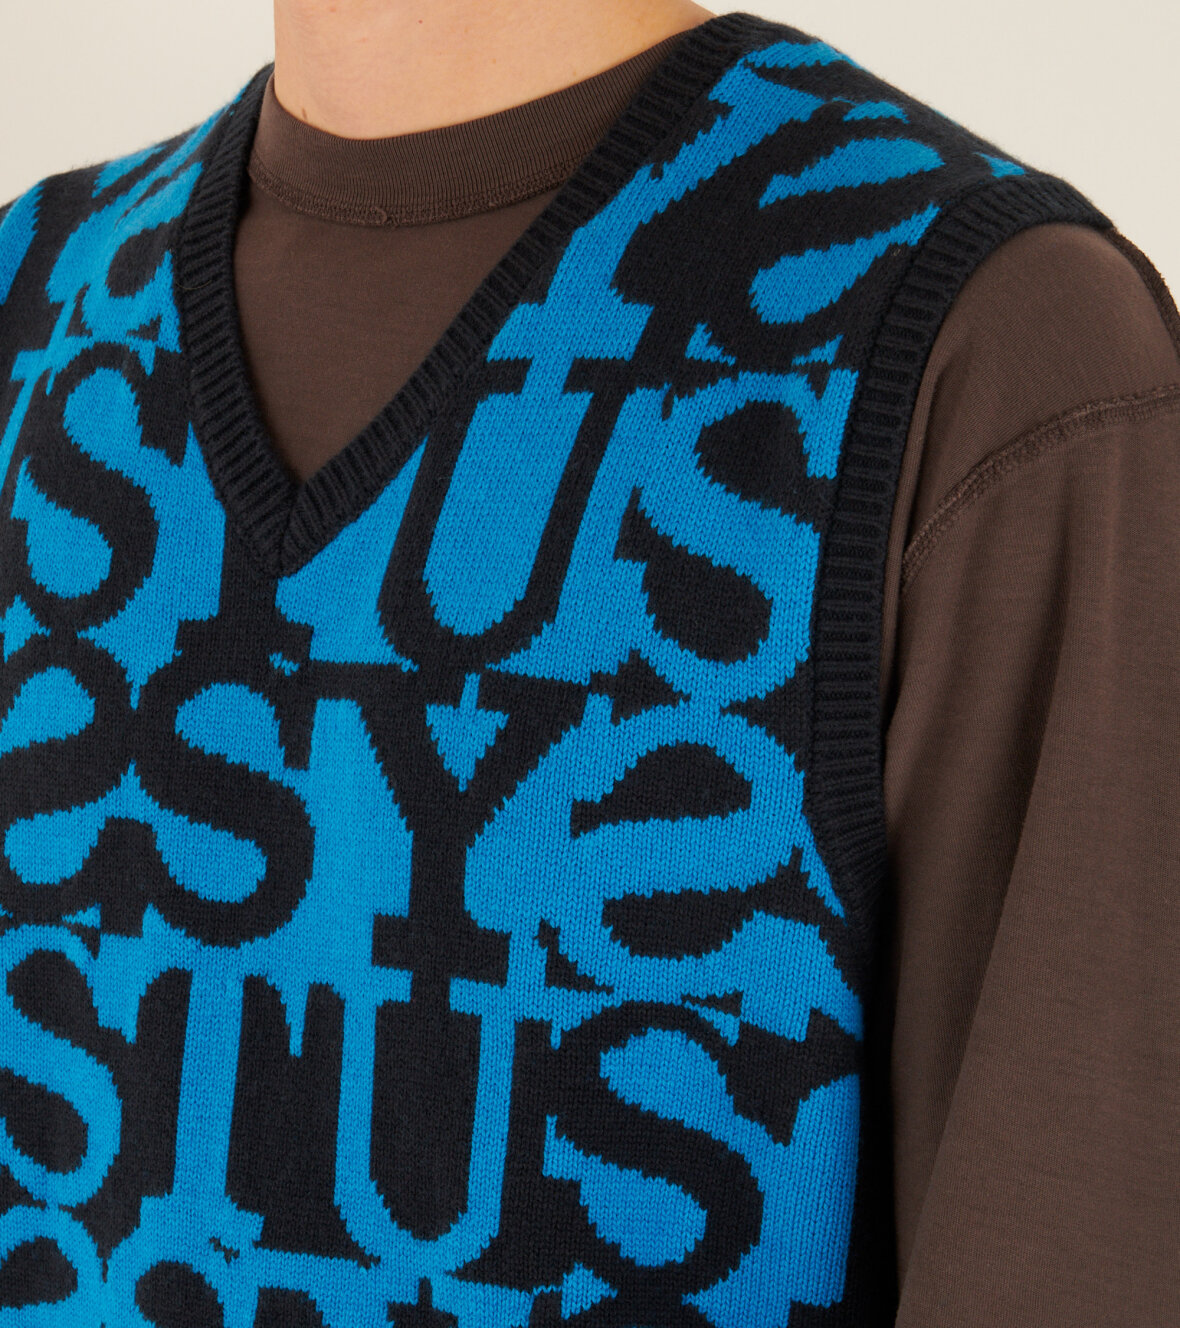 Stussy Stacked Sweater Vest